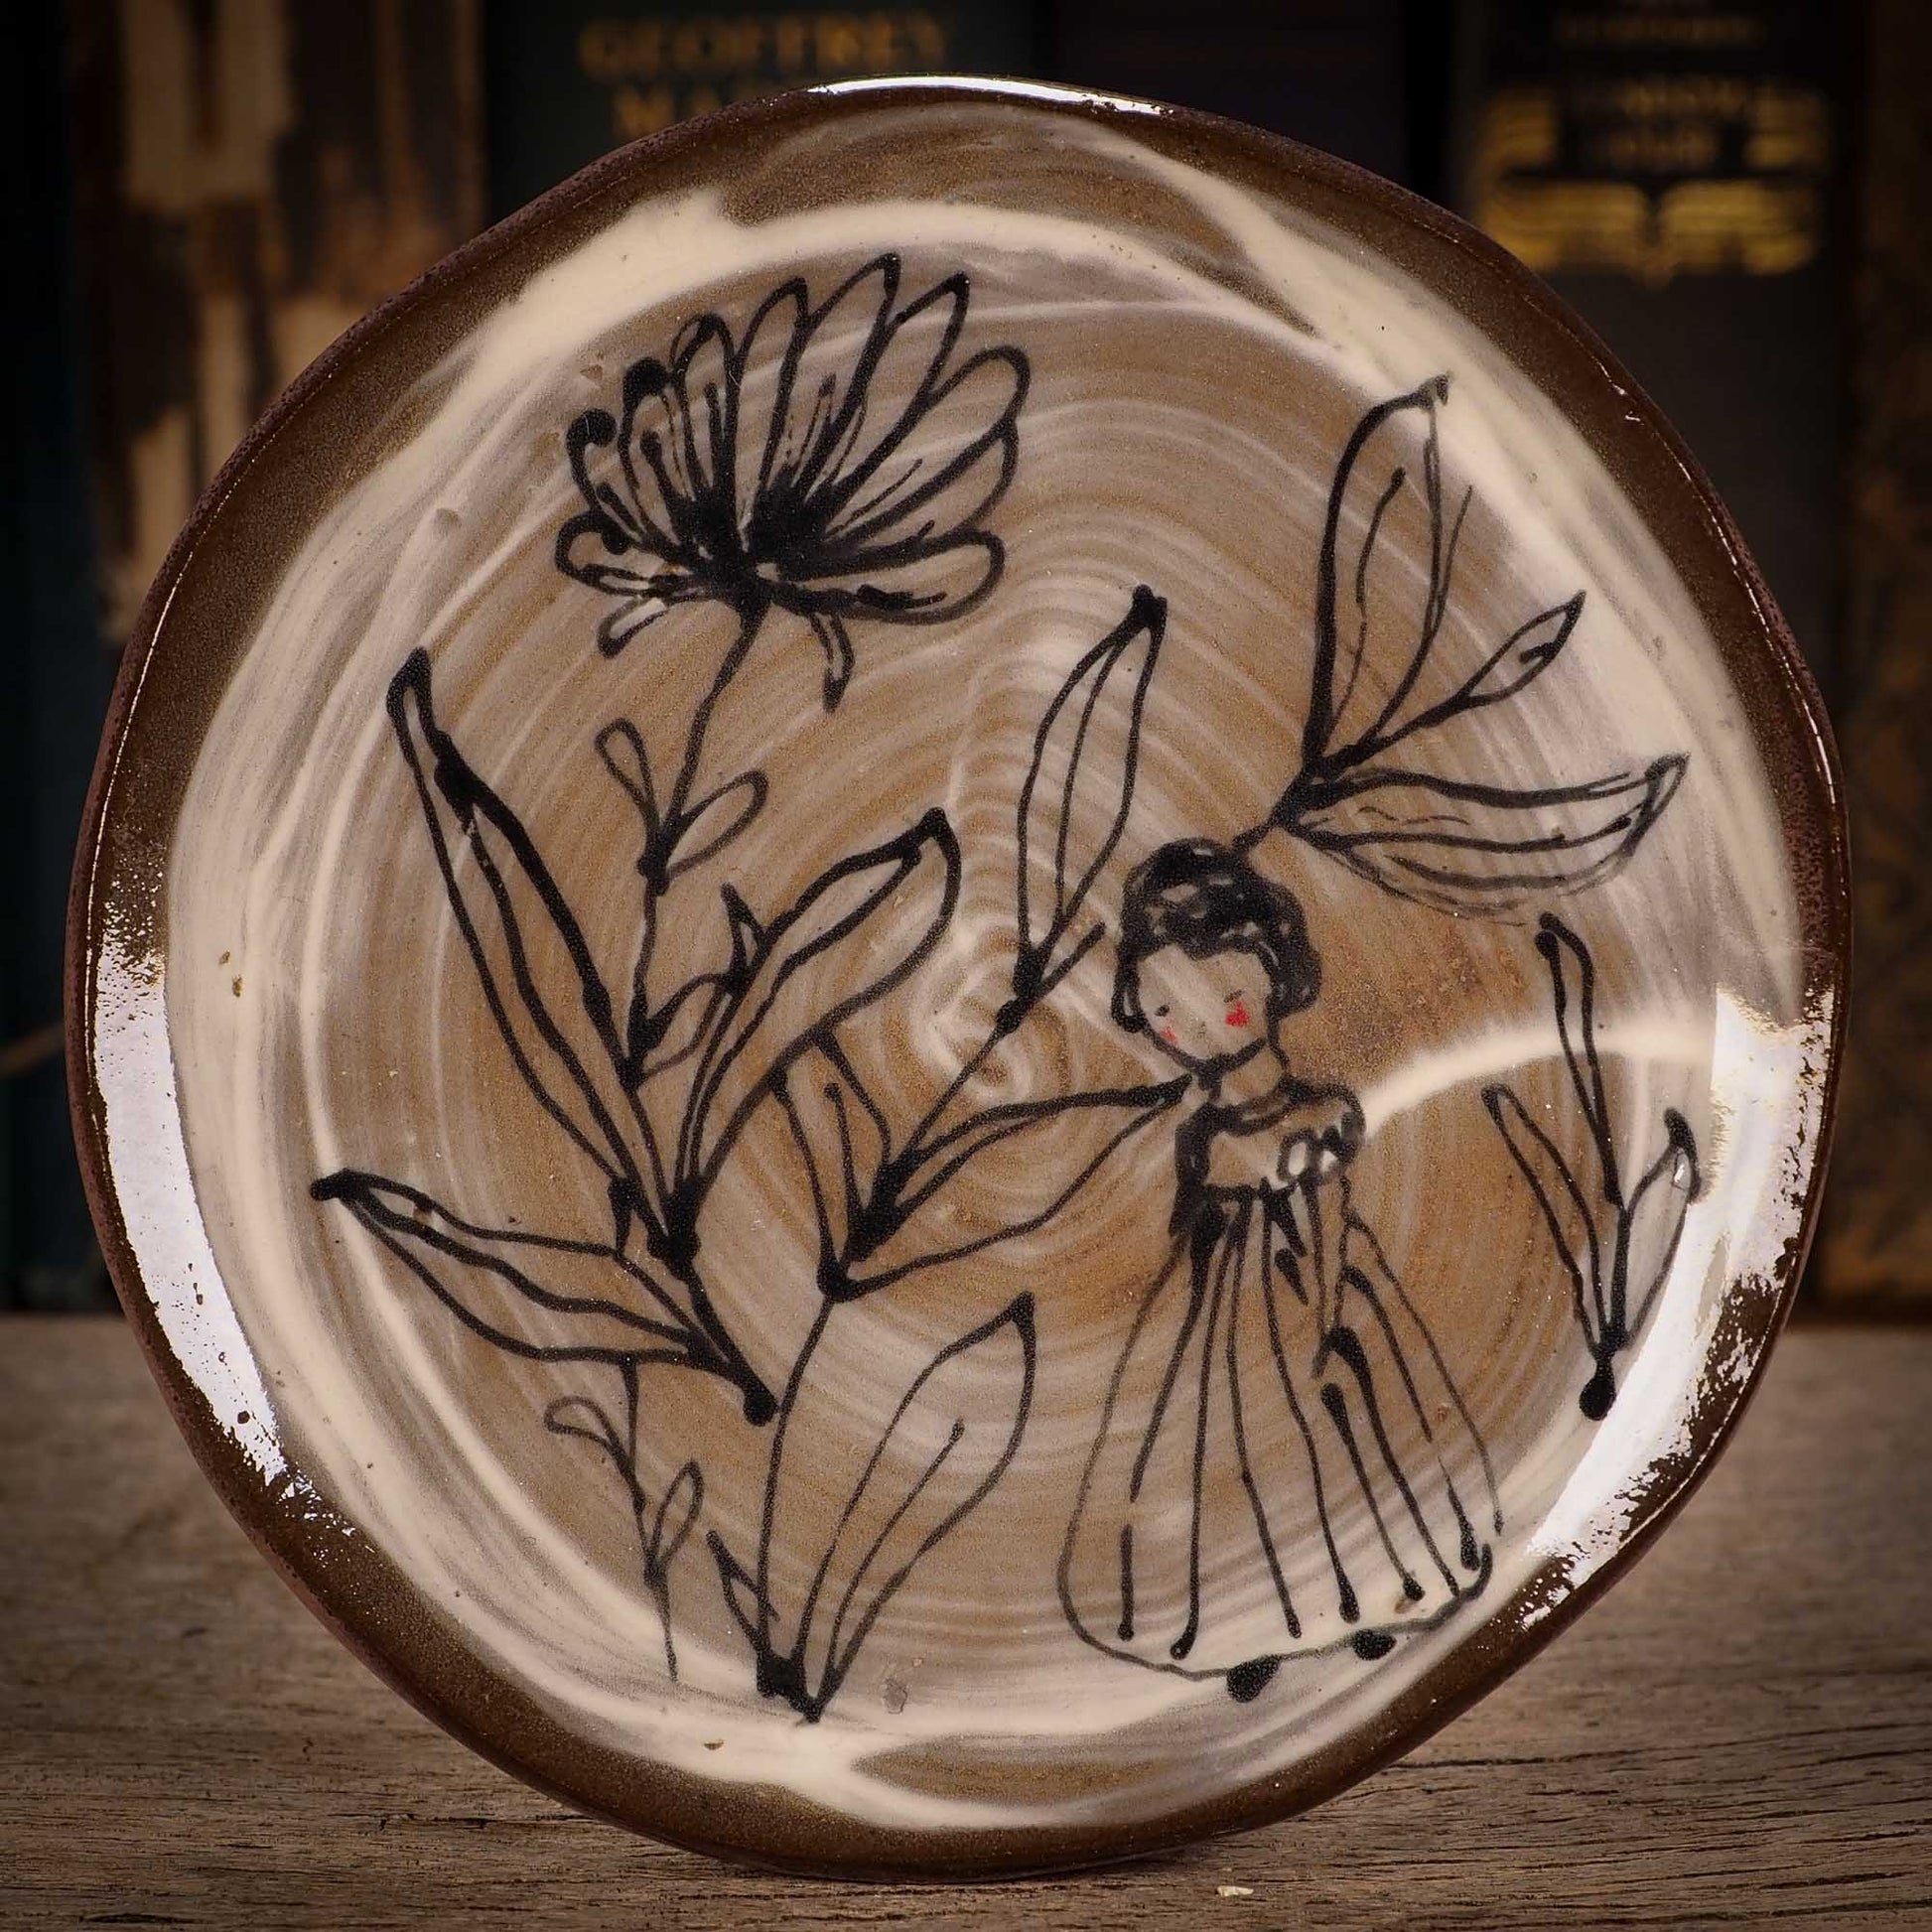 An original glazed ceramic food plate by Idania Salcido, the artist behind Danita Art. Totally handmade in my studio, this is a unique piece that cannot be repeated. Food and drink safe, hand wash only. Brown earth tones and an ink drawing of a girl on the outside.